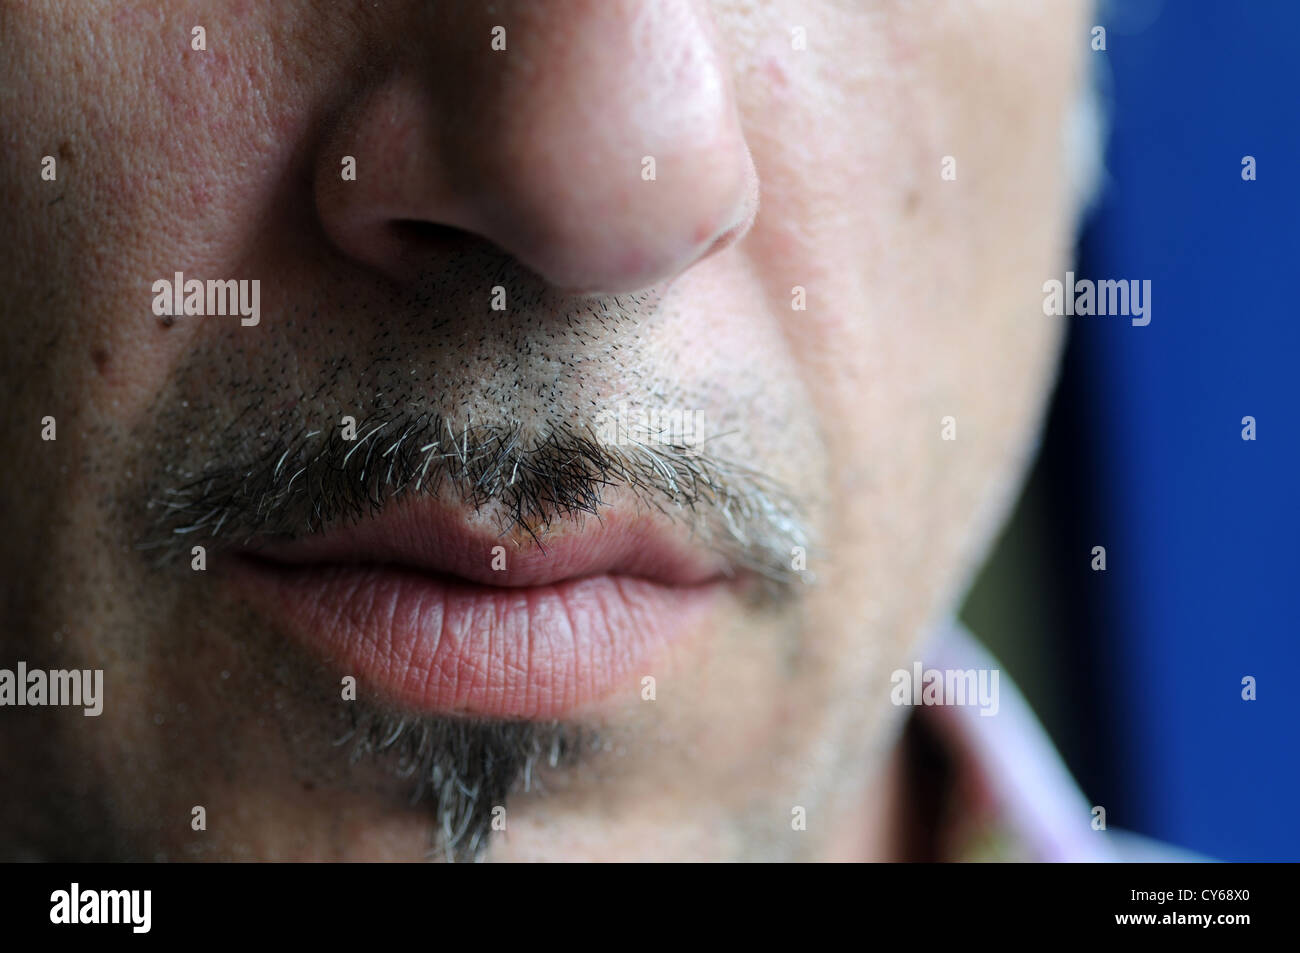 closeup mustaches and closed mouth of mature man Stock Photo